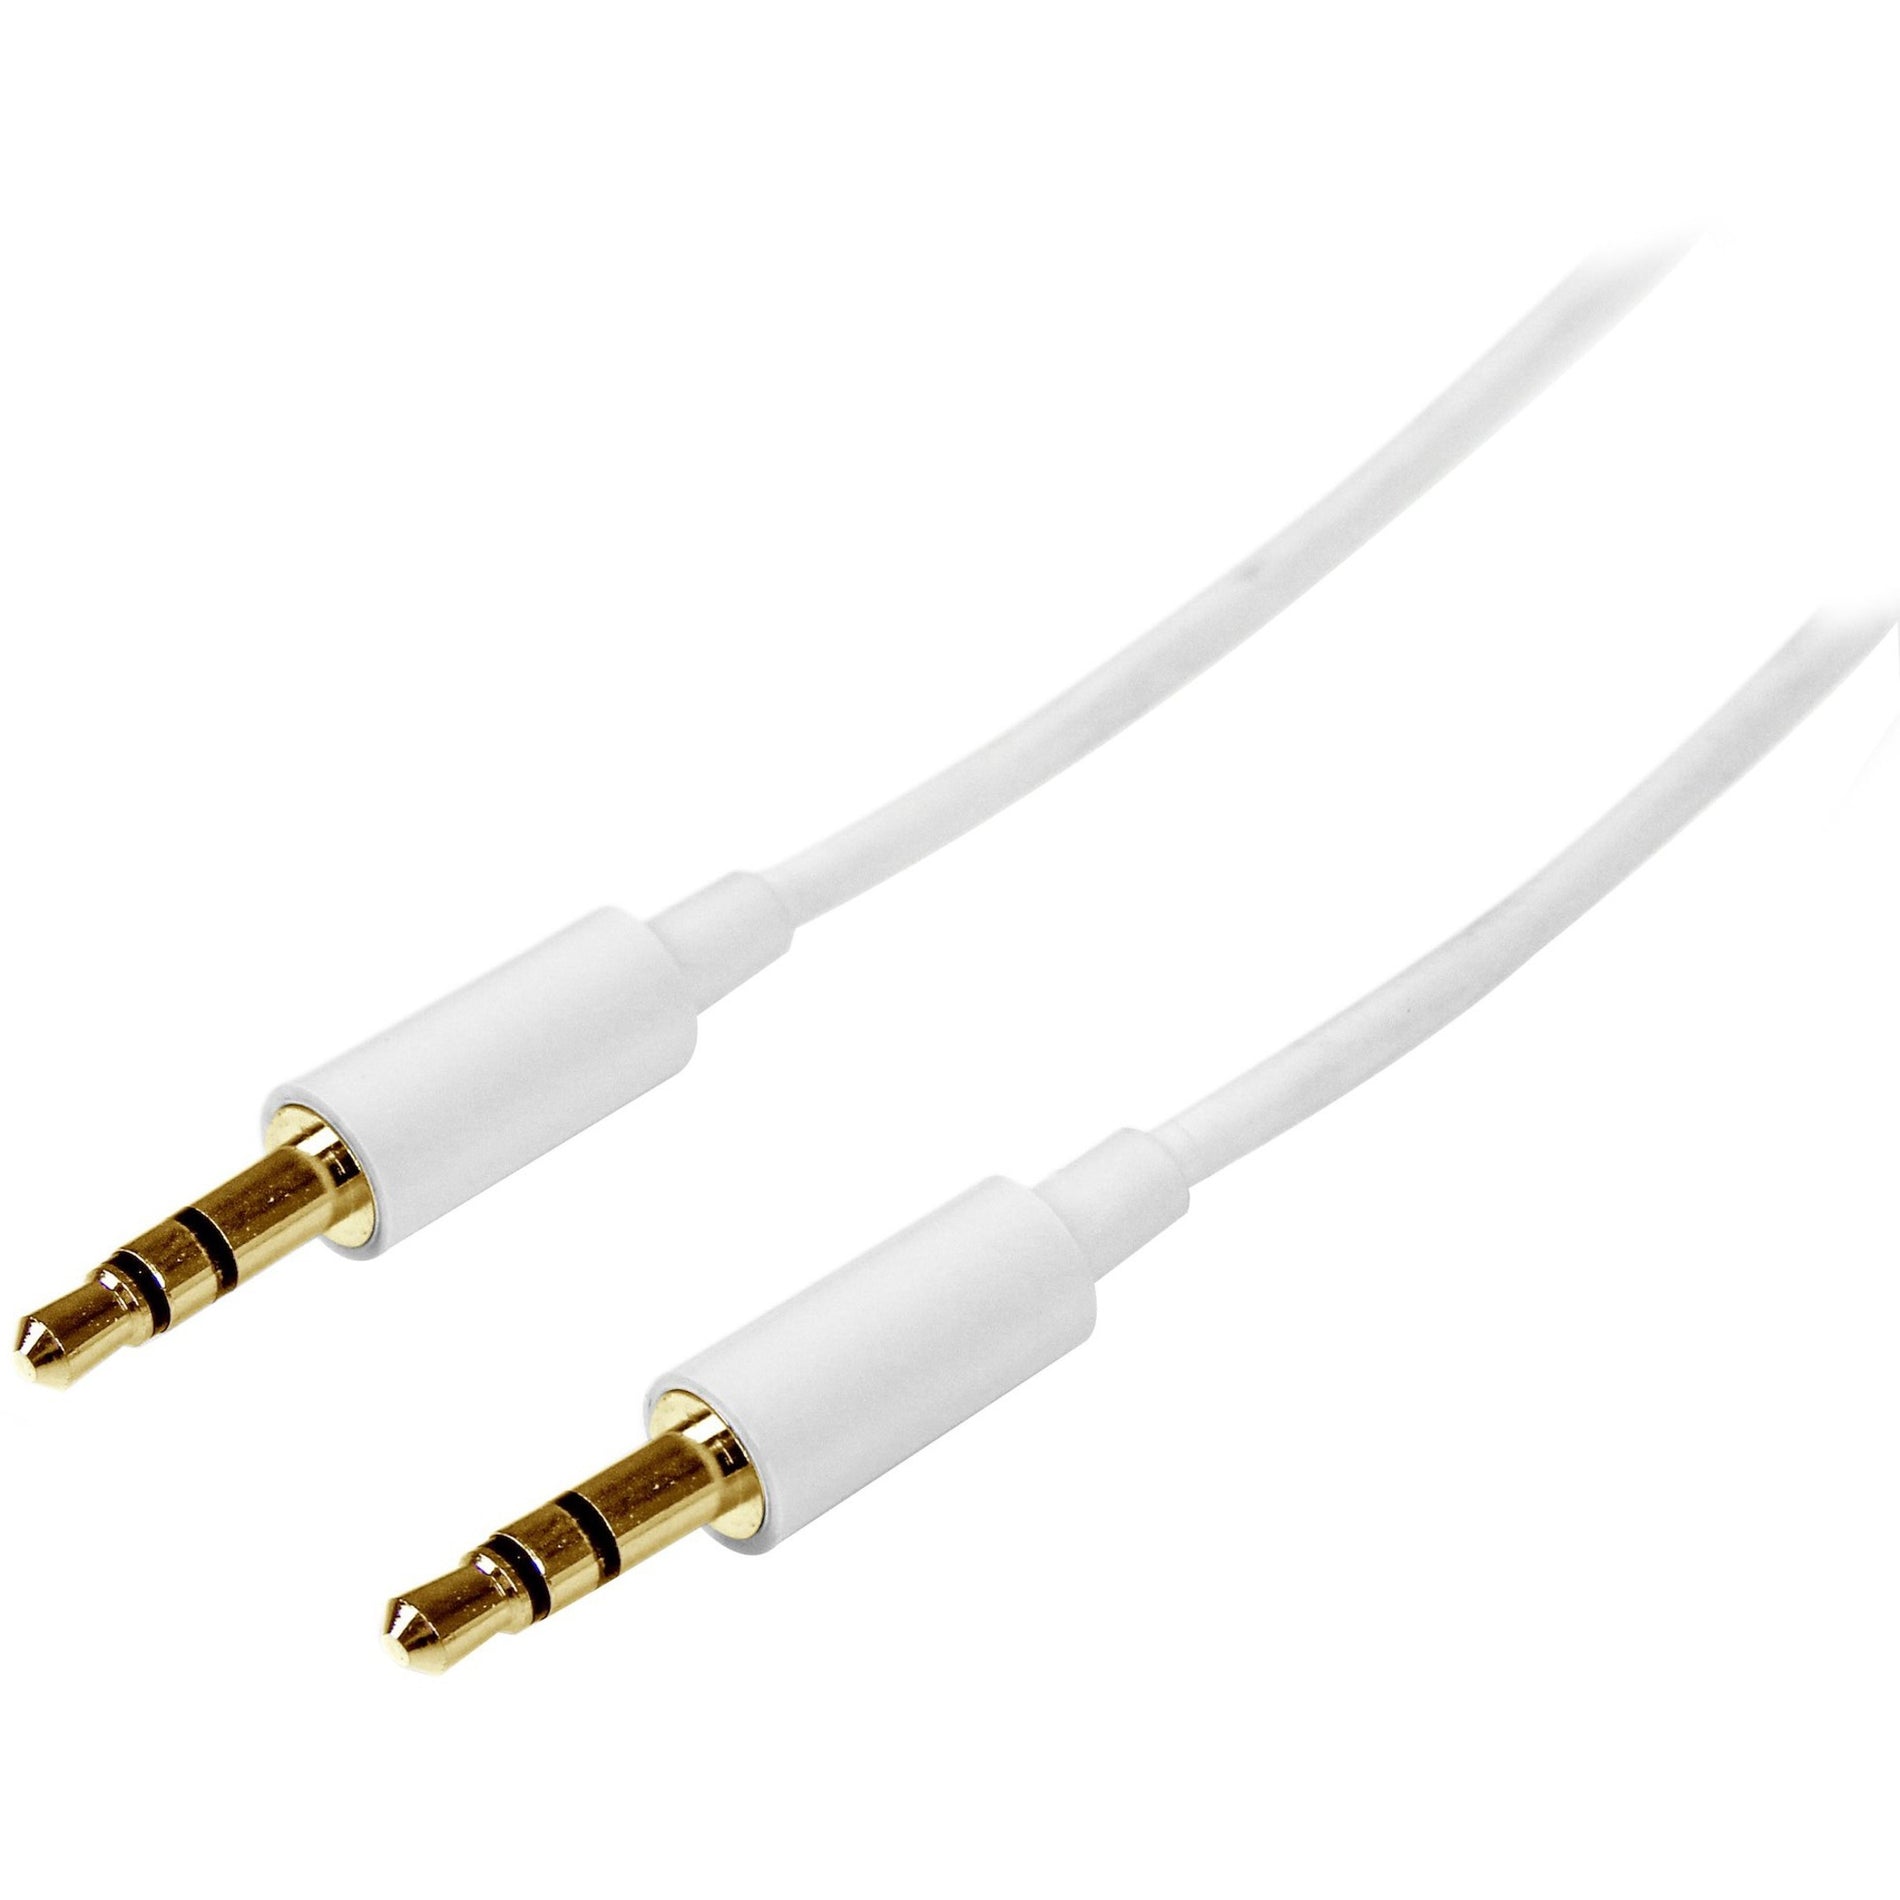 StarTech.com MU2MMMSWH 2m White Slim 3.5mm Stereo Audio Cable - Male to Male, Molded, Copper Conductor, Nickel Plated Connectors